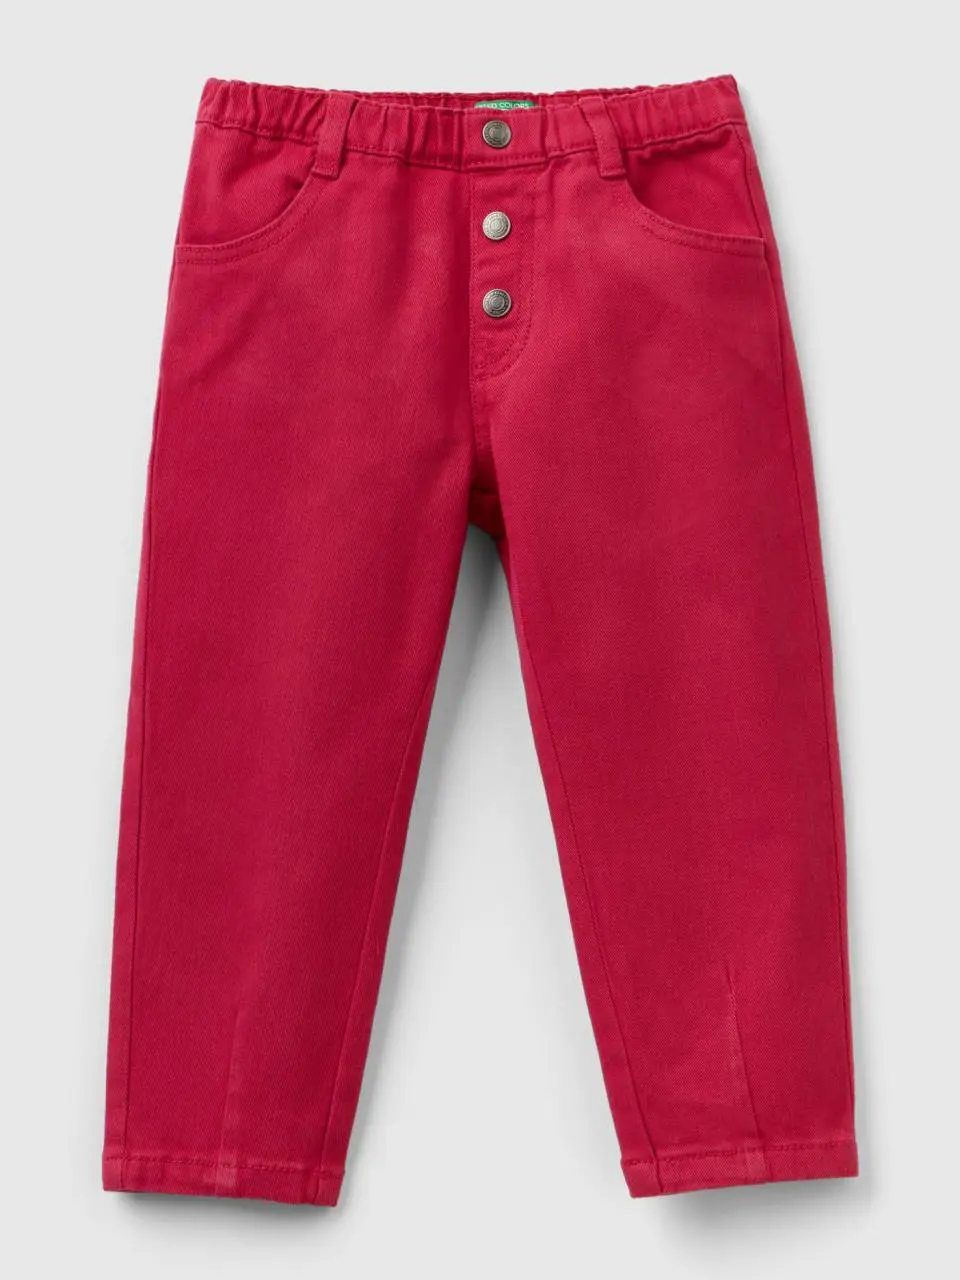 Benetton baggy fit trousers. 1